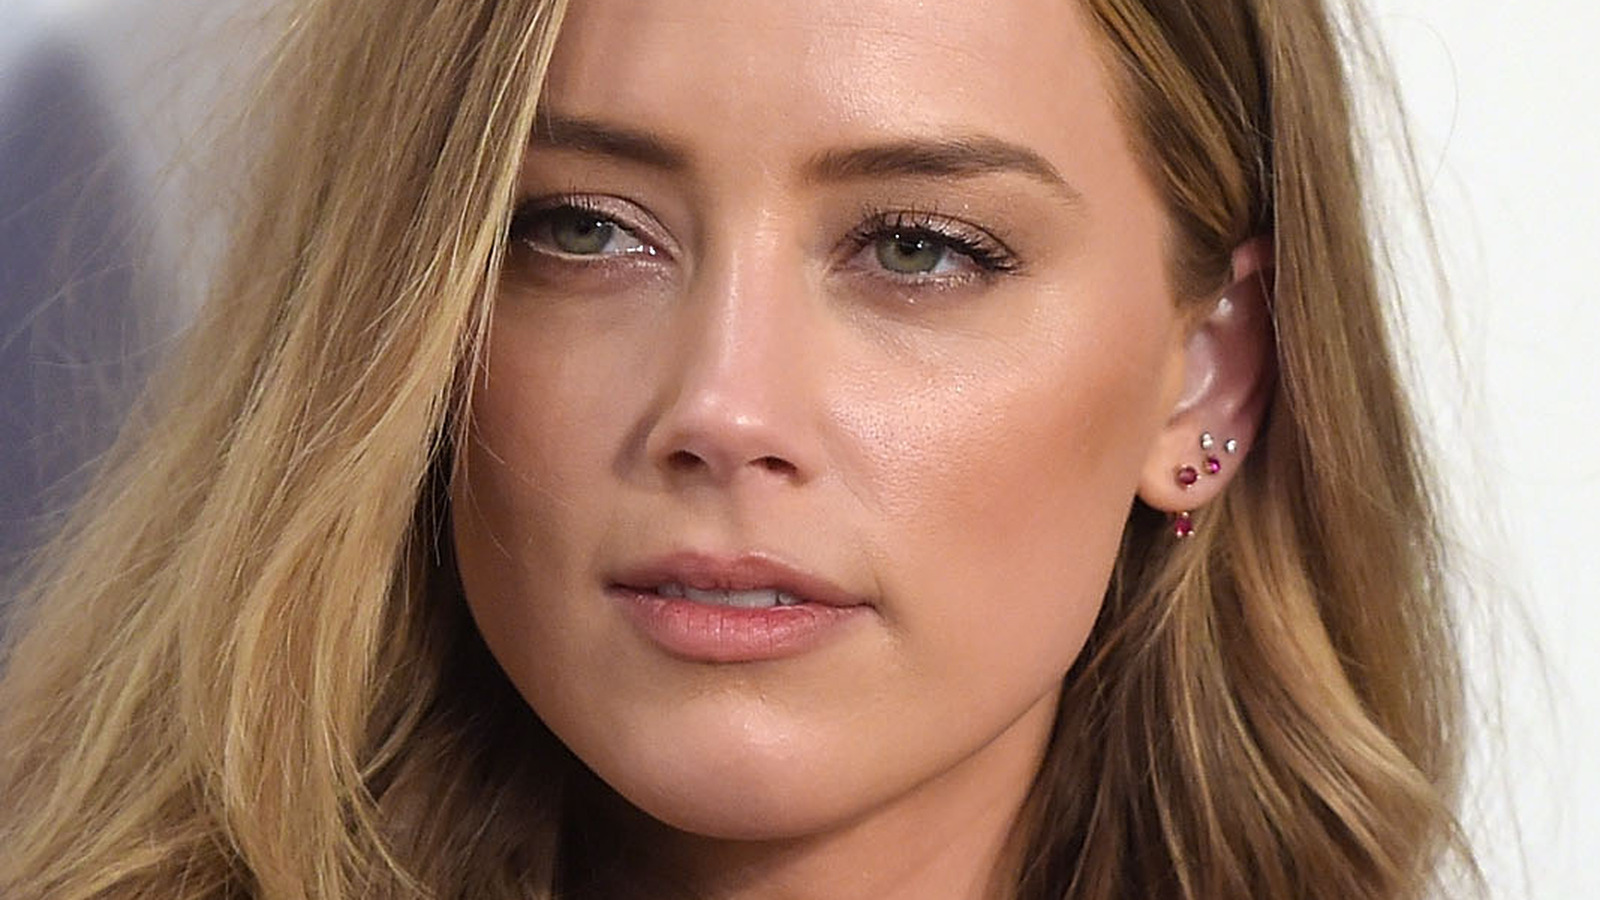 Amber Heard Porn Movie - The Transformation Of Amber Heard From Childhood To 36